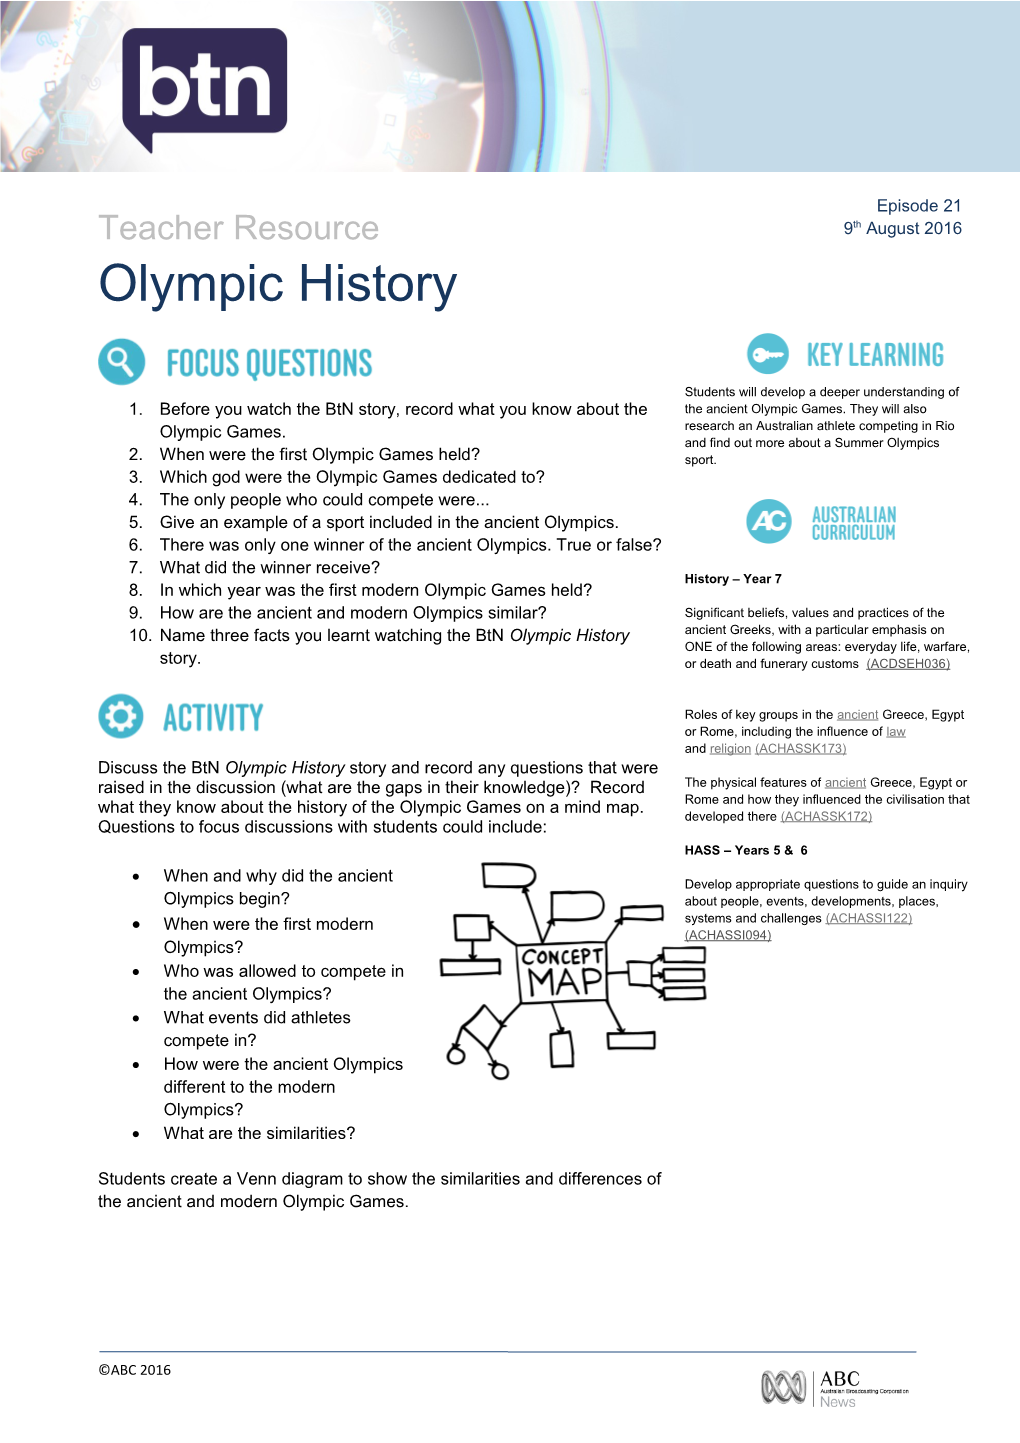 2. When Were the First Olympic Games Held?